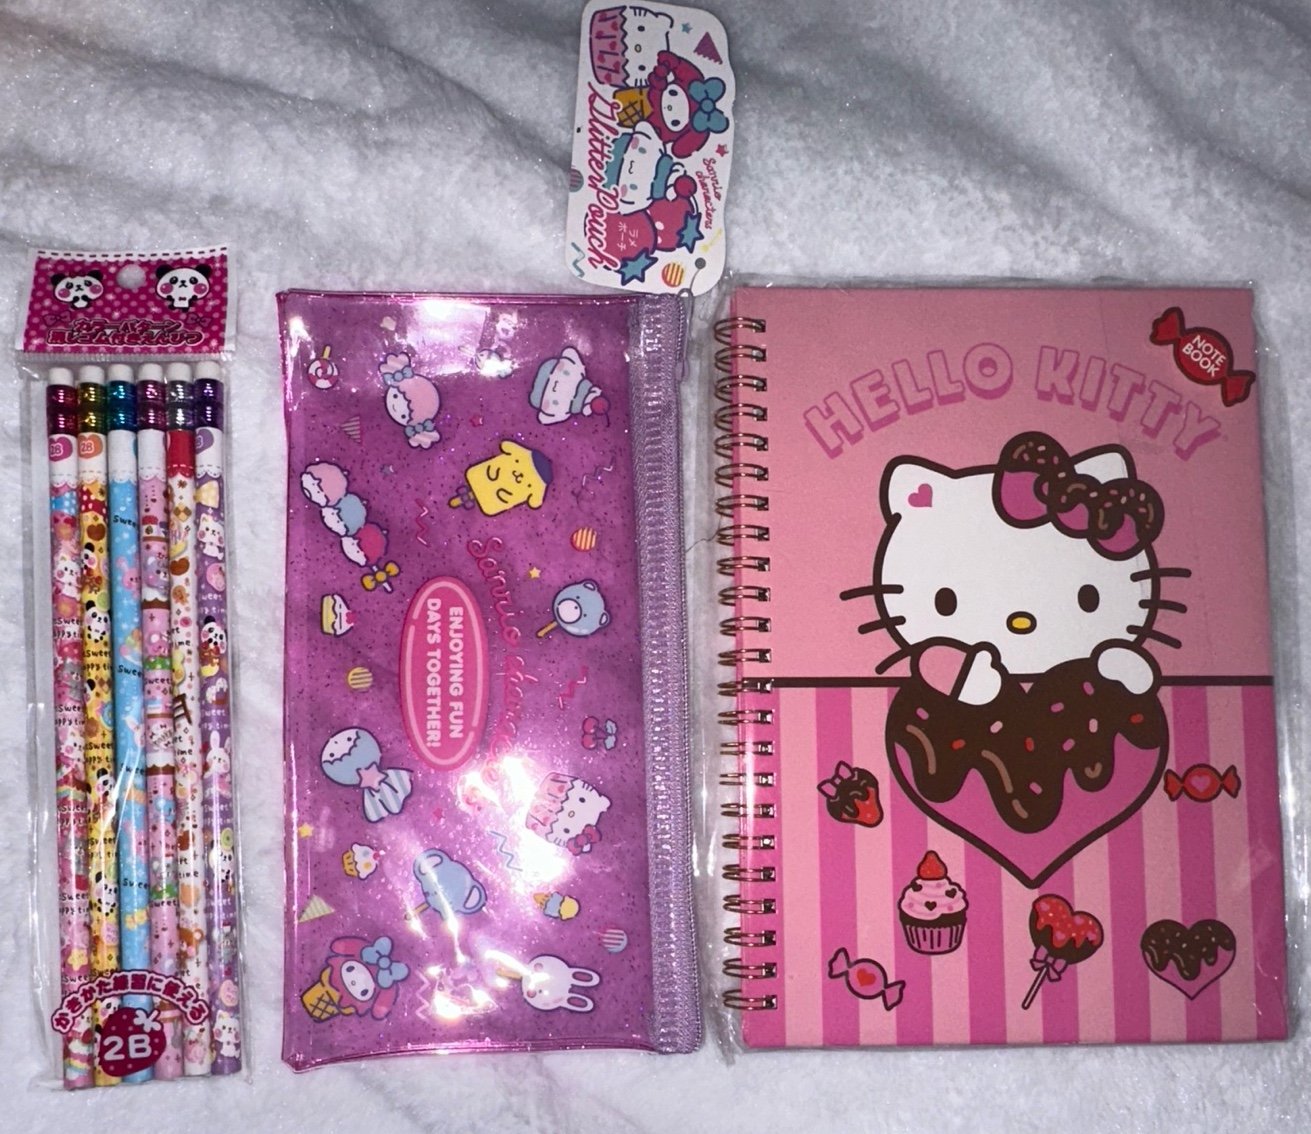 HELLO KITTY STATIONARY NEW • NOTEBOOK/PENCIL POUCH/PENCILS • KAWAII STATIONARY • bXK7QDWIl